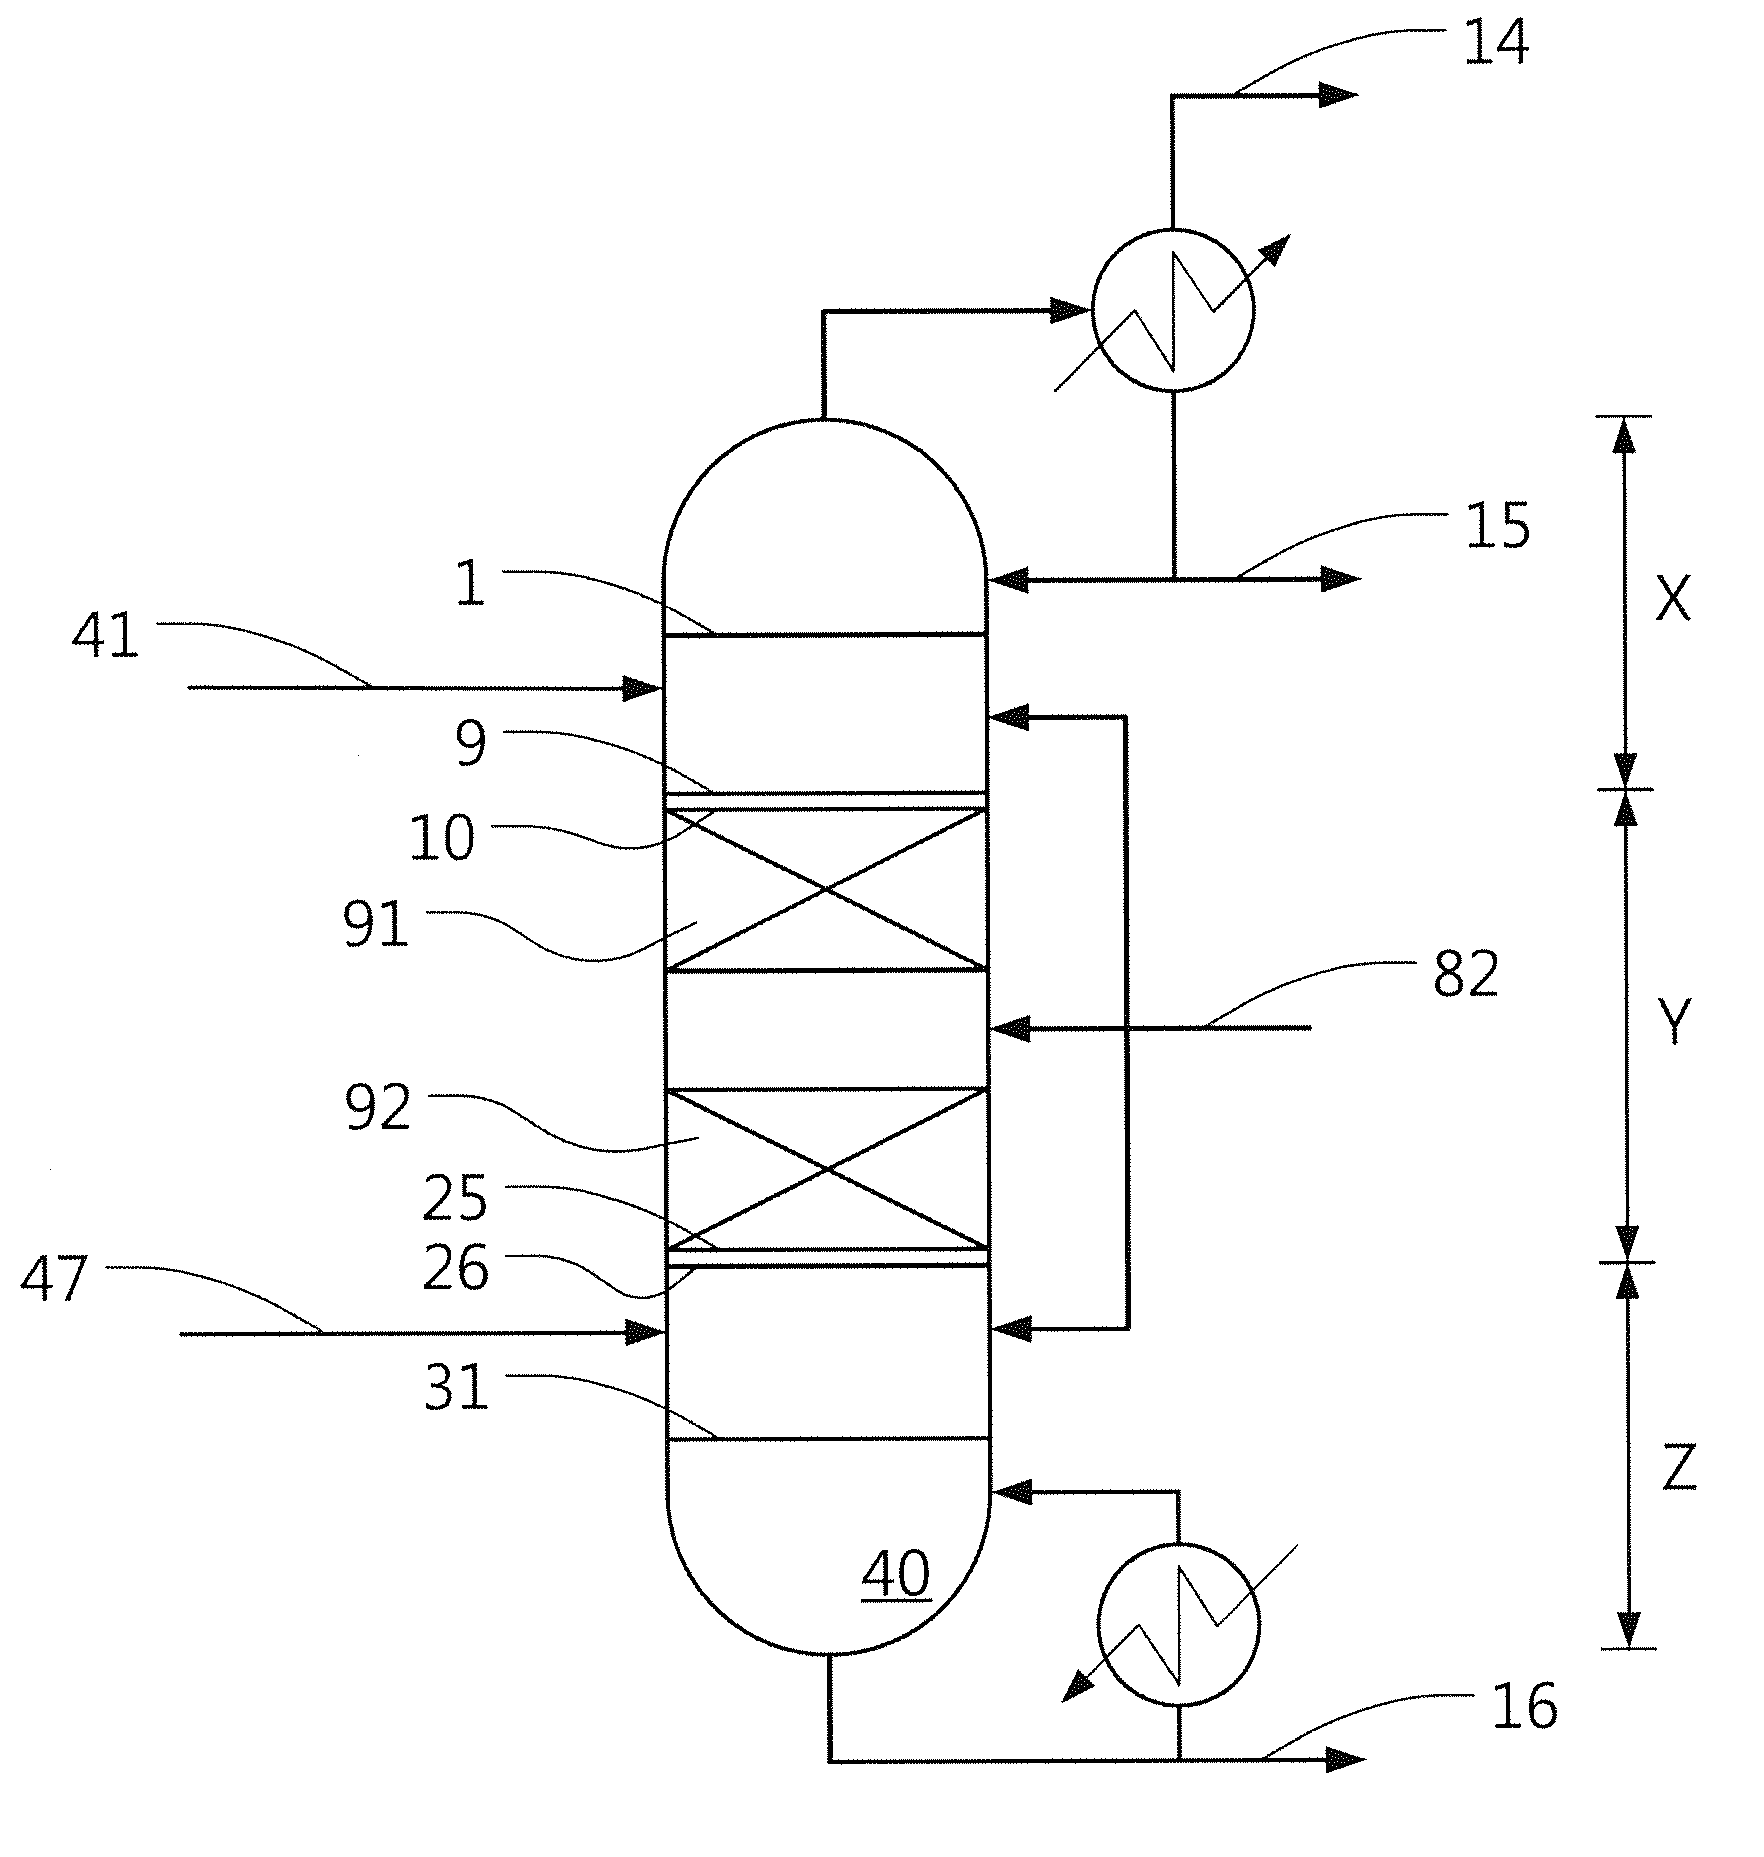 Method for coproducing isobutene and MTBE from tert-butanol mixture in a catalytic distillation column